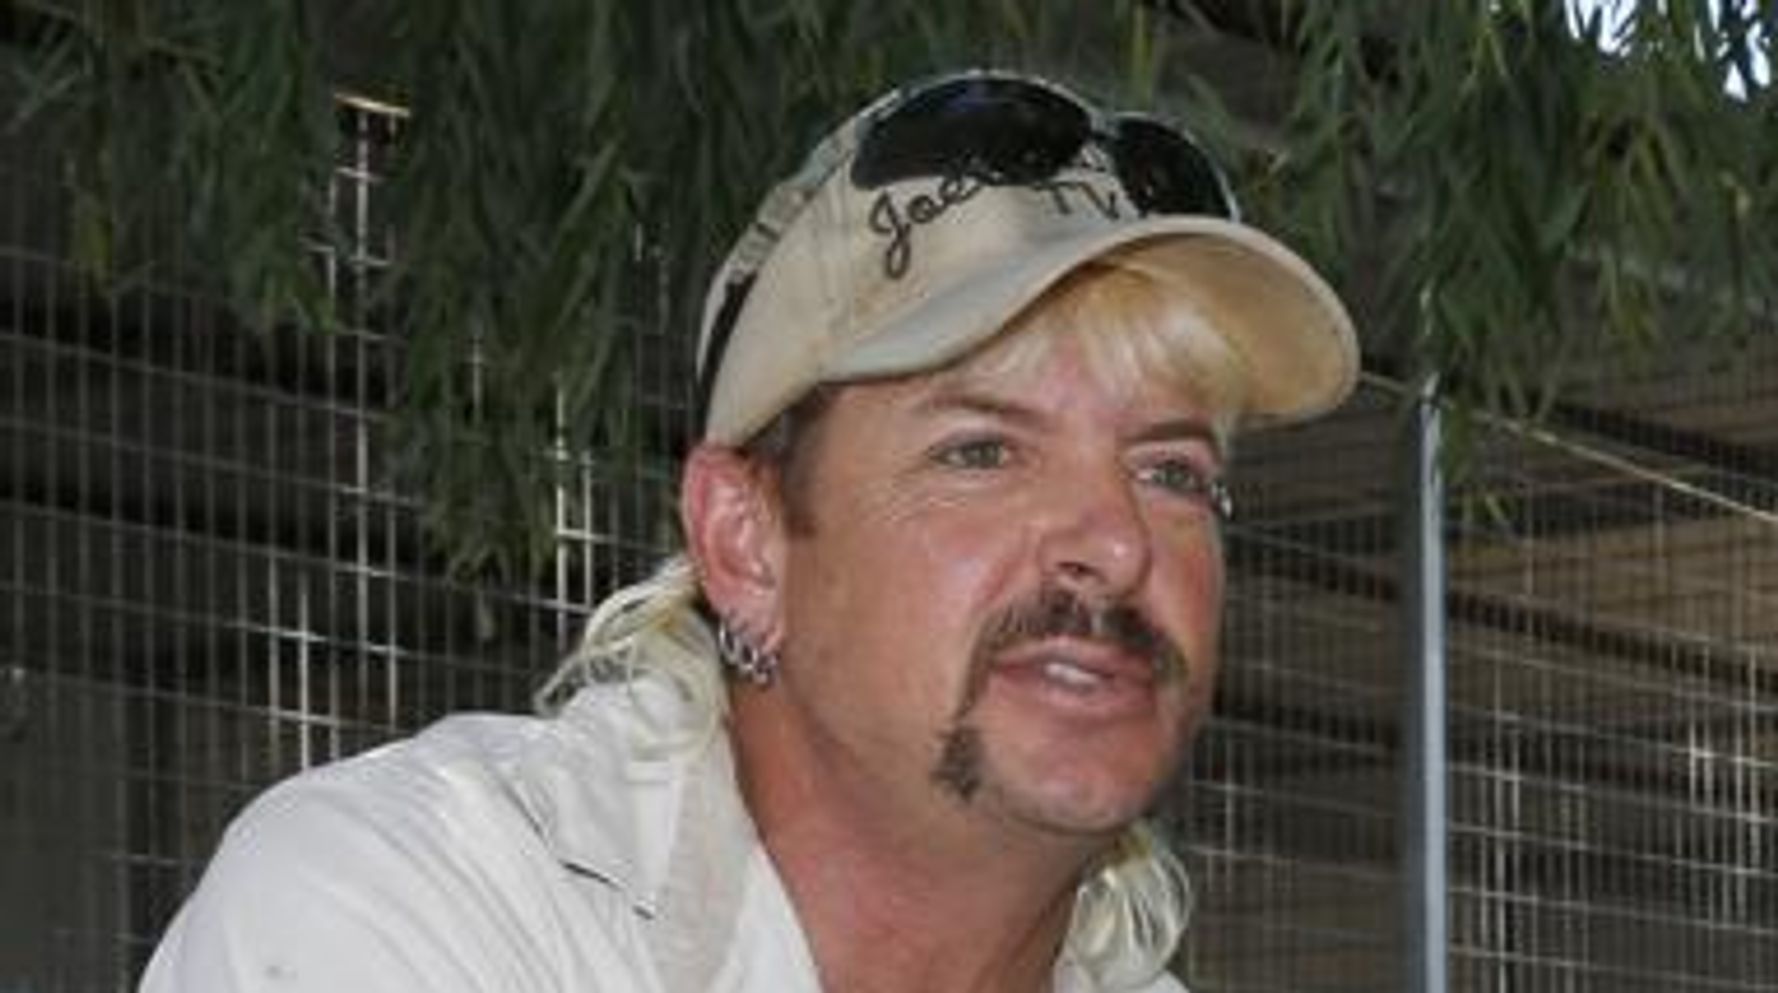 Joe Exotic Of ‘Tiger King’ Moved To New Facility After Cancer Diagnosis